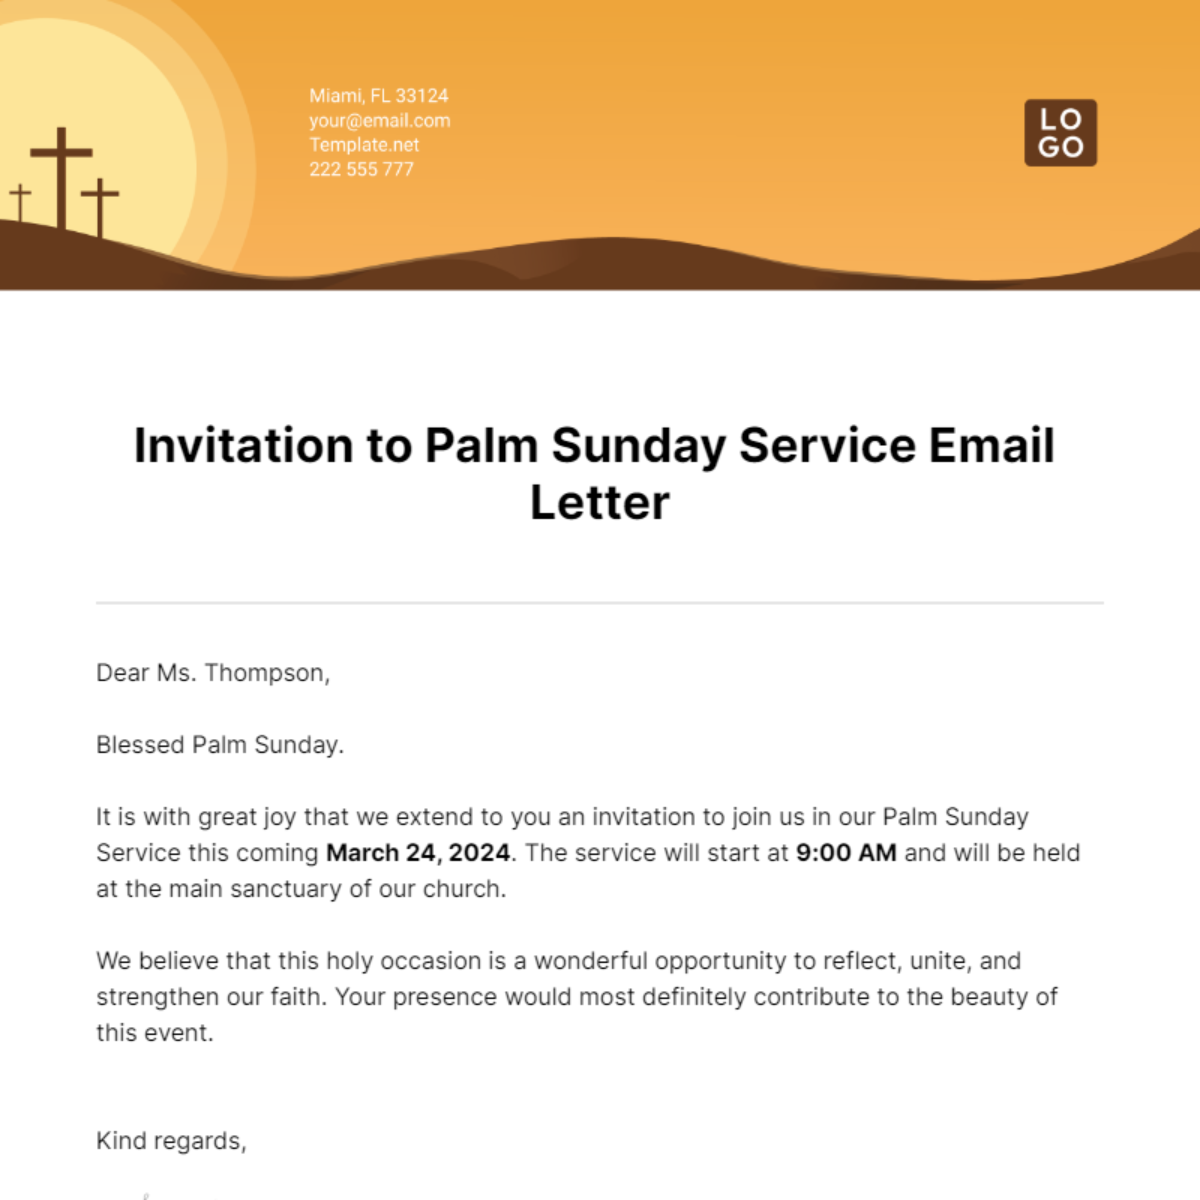 Free Invitation to Palm Sunday Service Email Letter Template